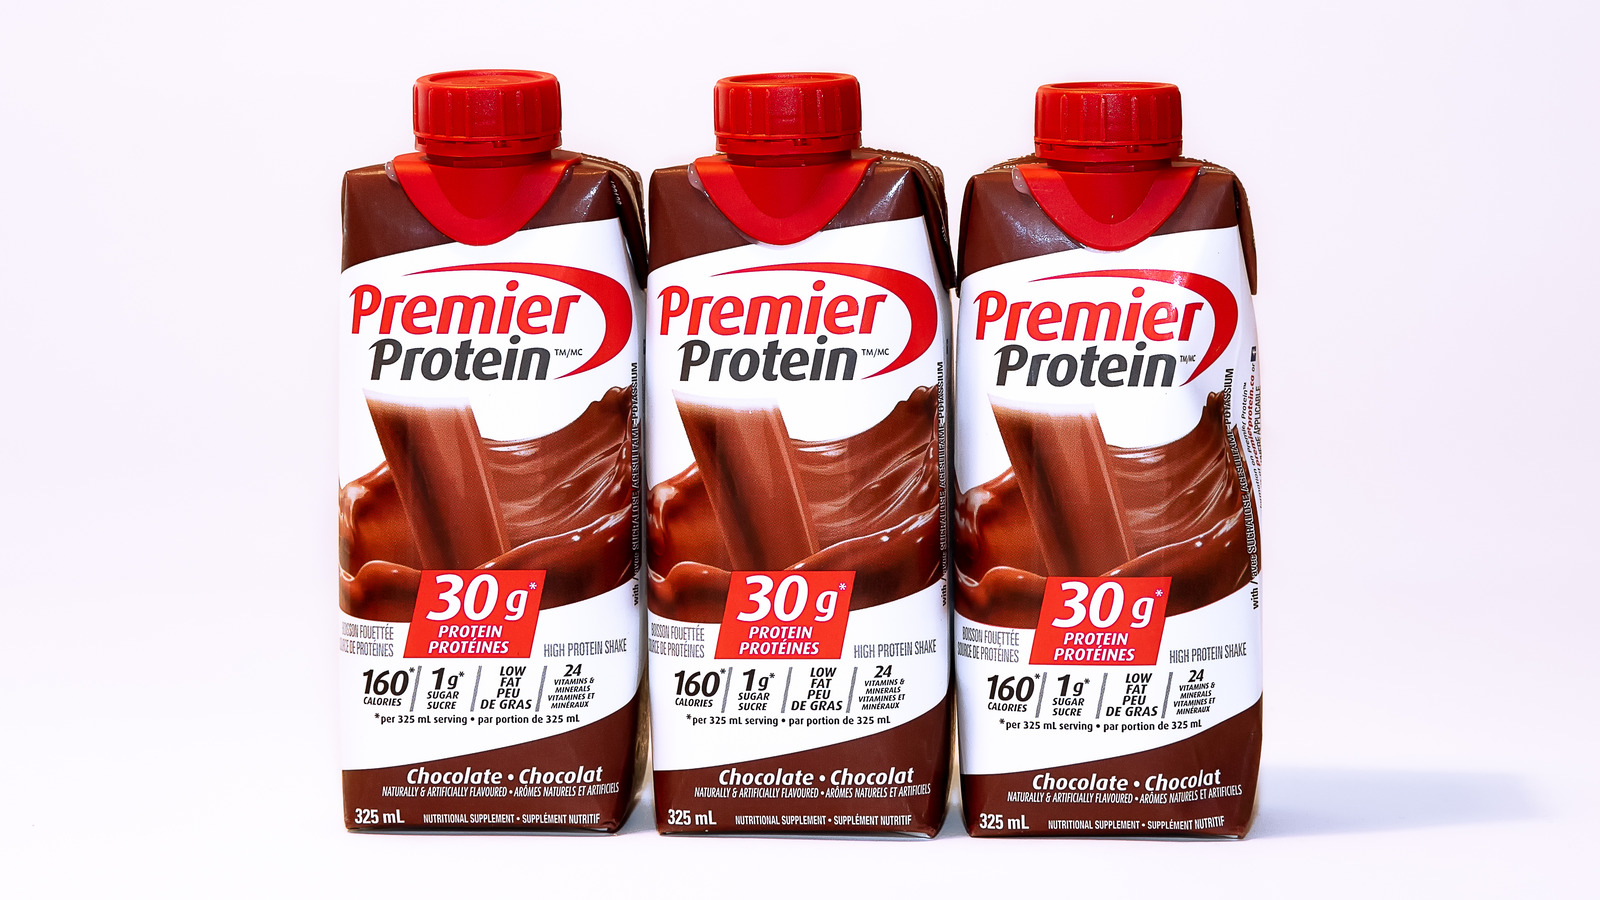 Is Premier Protein Good For You?